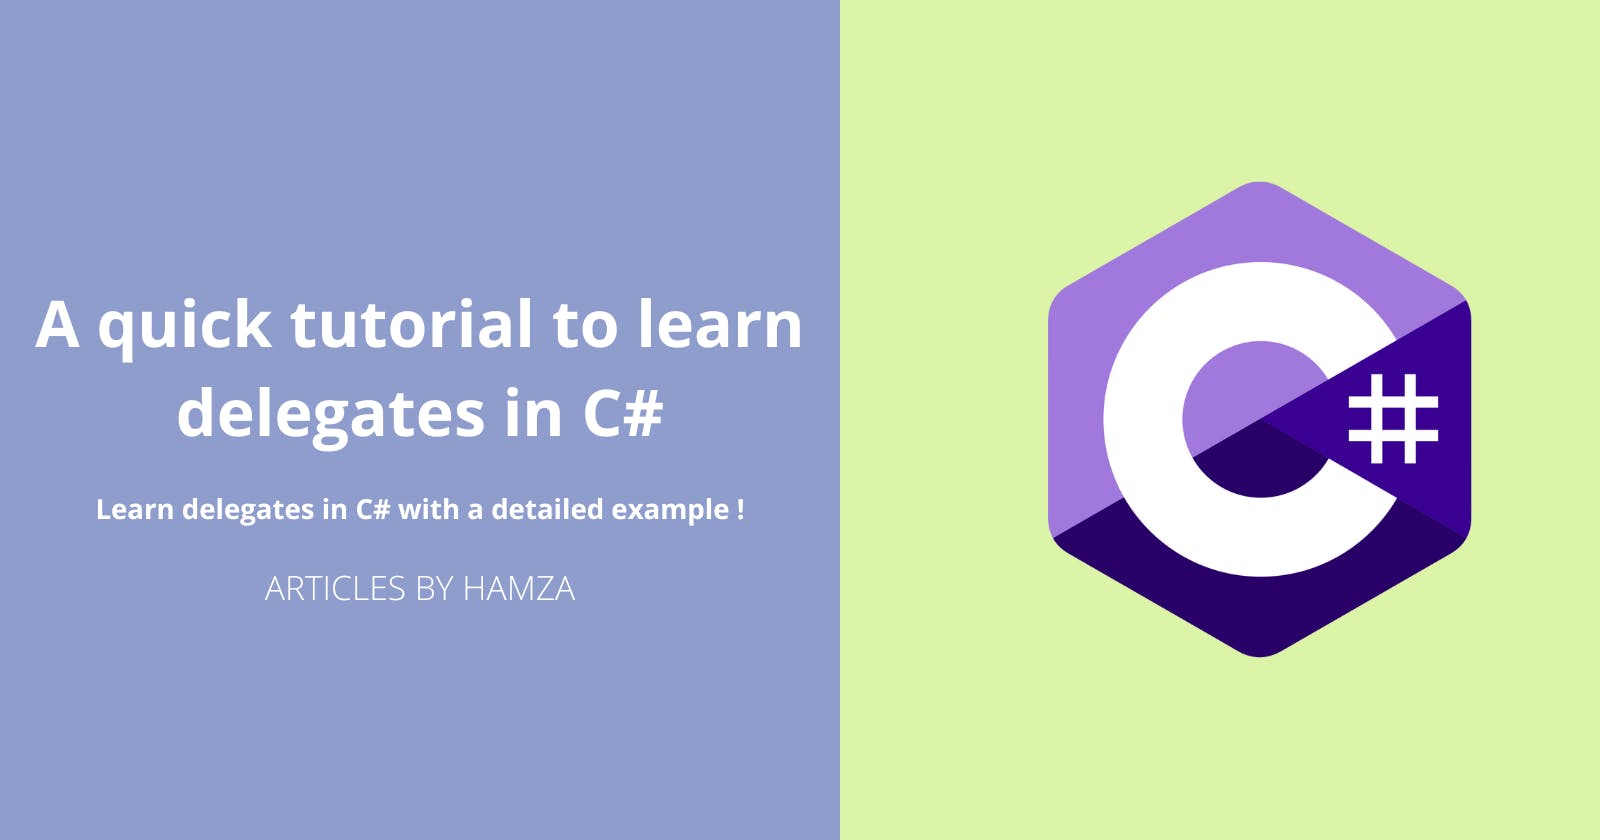 A quick tutorial to learn delegates in C#